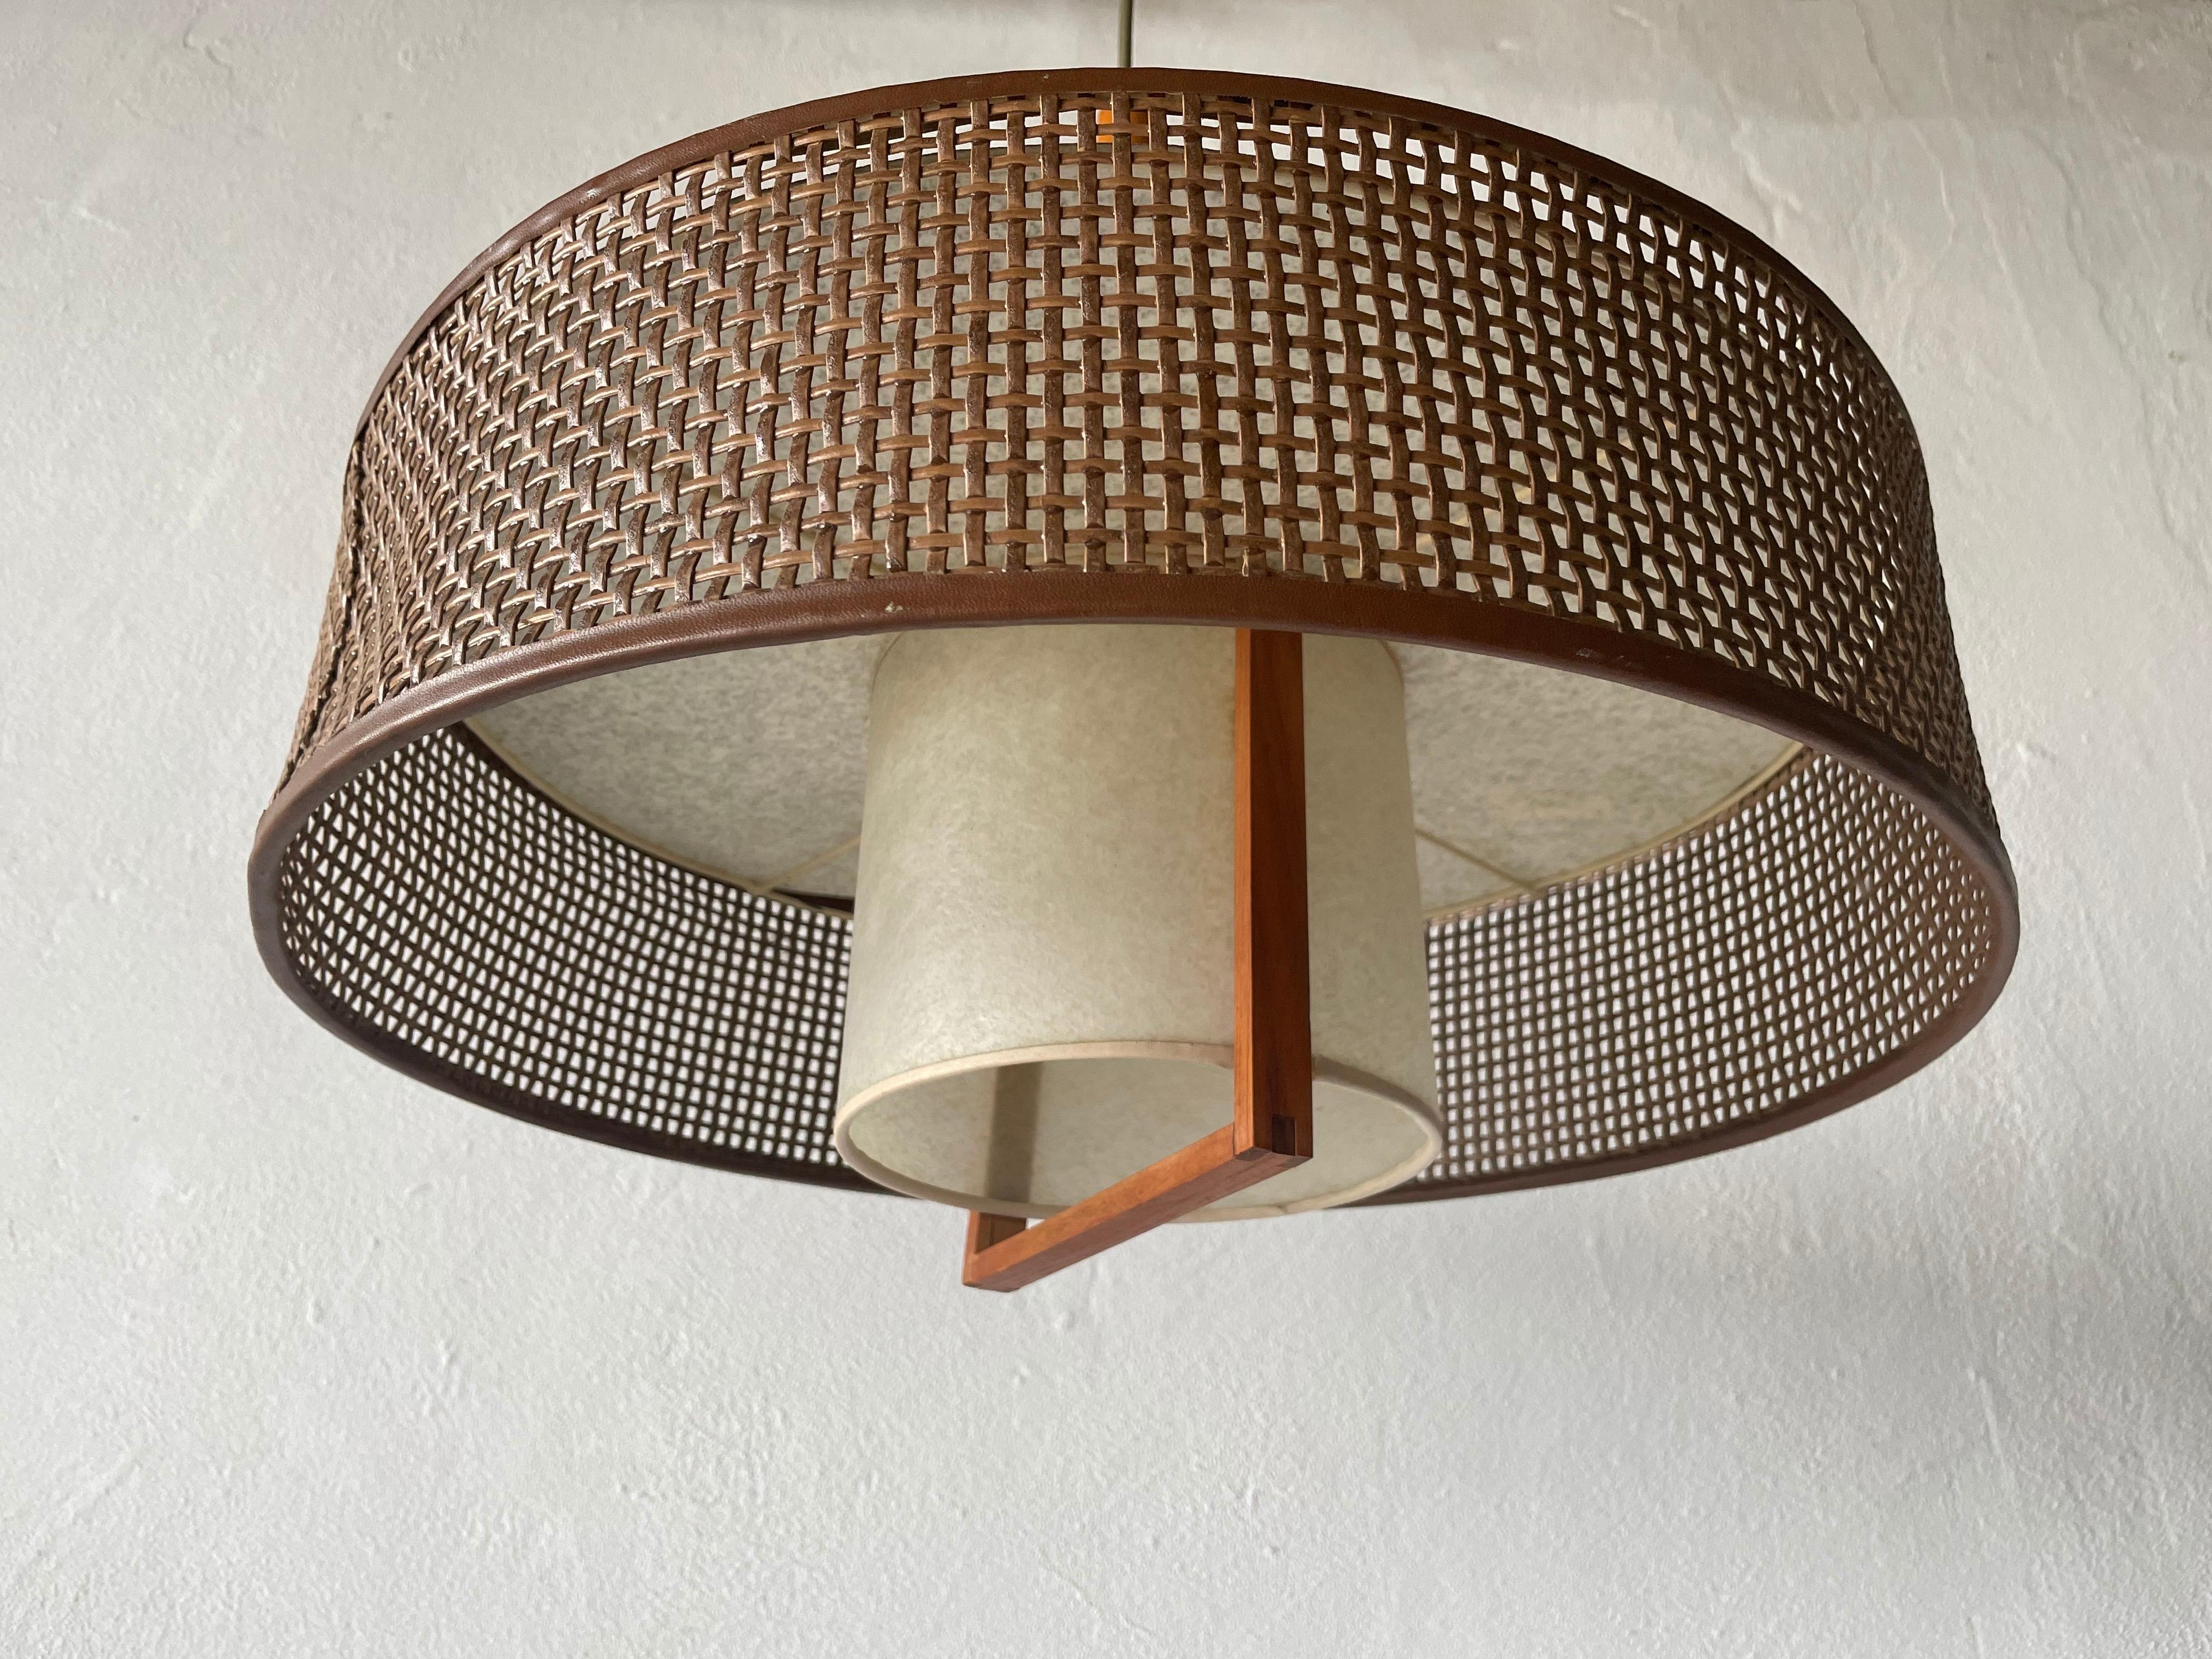 Mid-20th Century Wood and Wicker Pendant Lamp by Temde, 1960s Switzerland For Sale